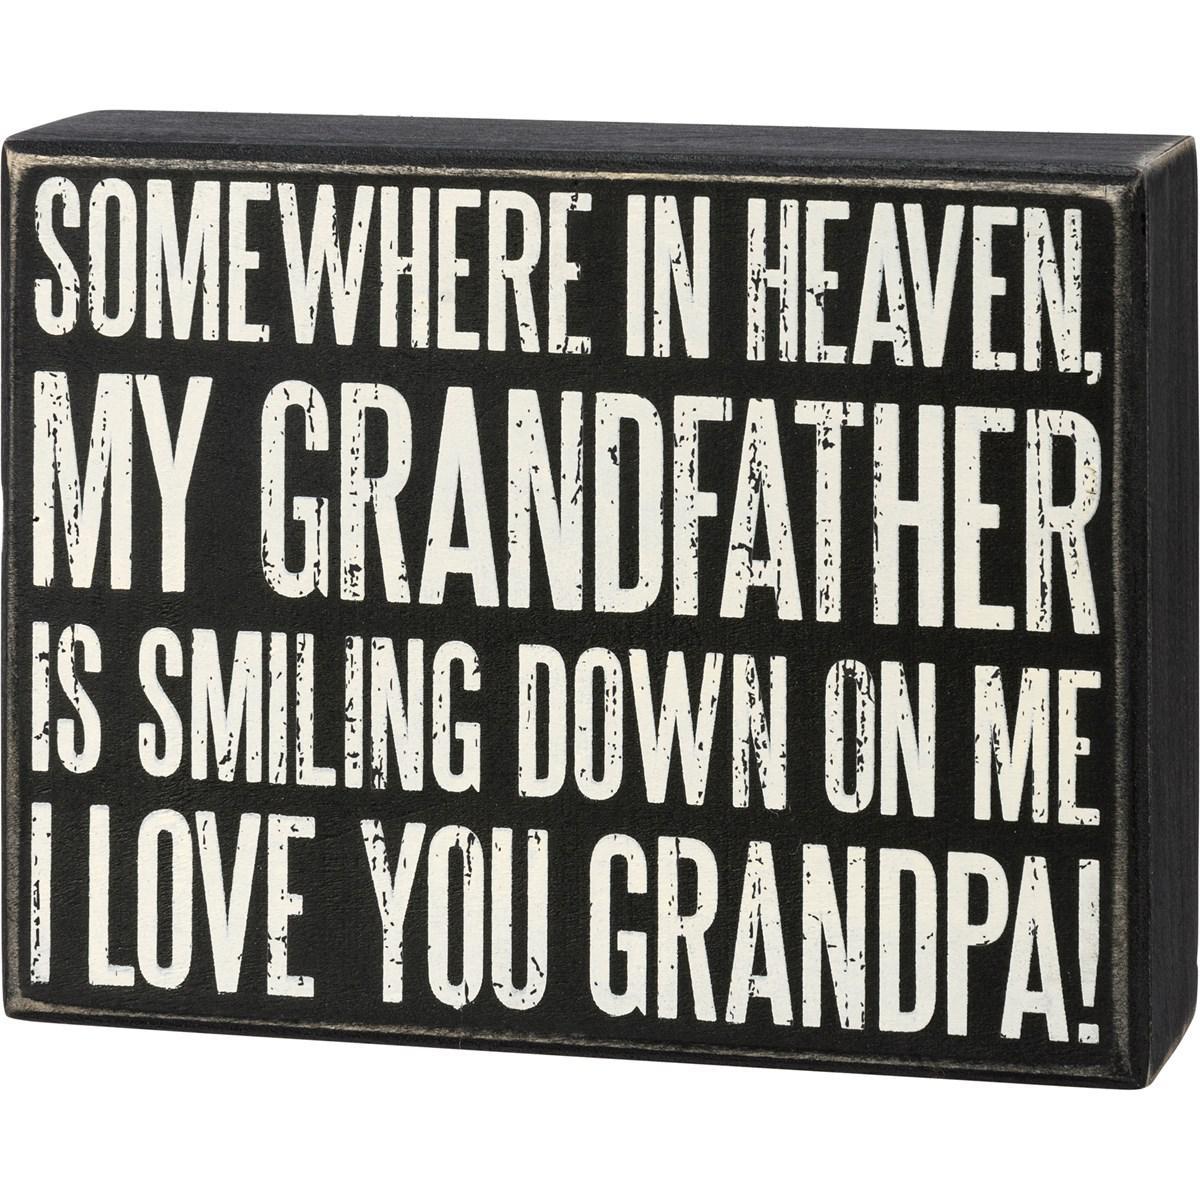 Somewhere In Heaven, My Grandfather Is Smiling Down On Me I Love You Grandpa!